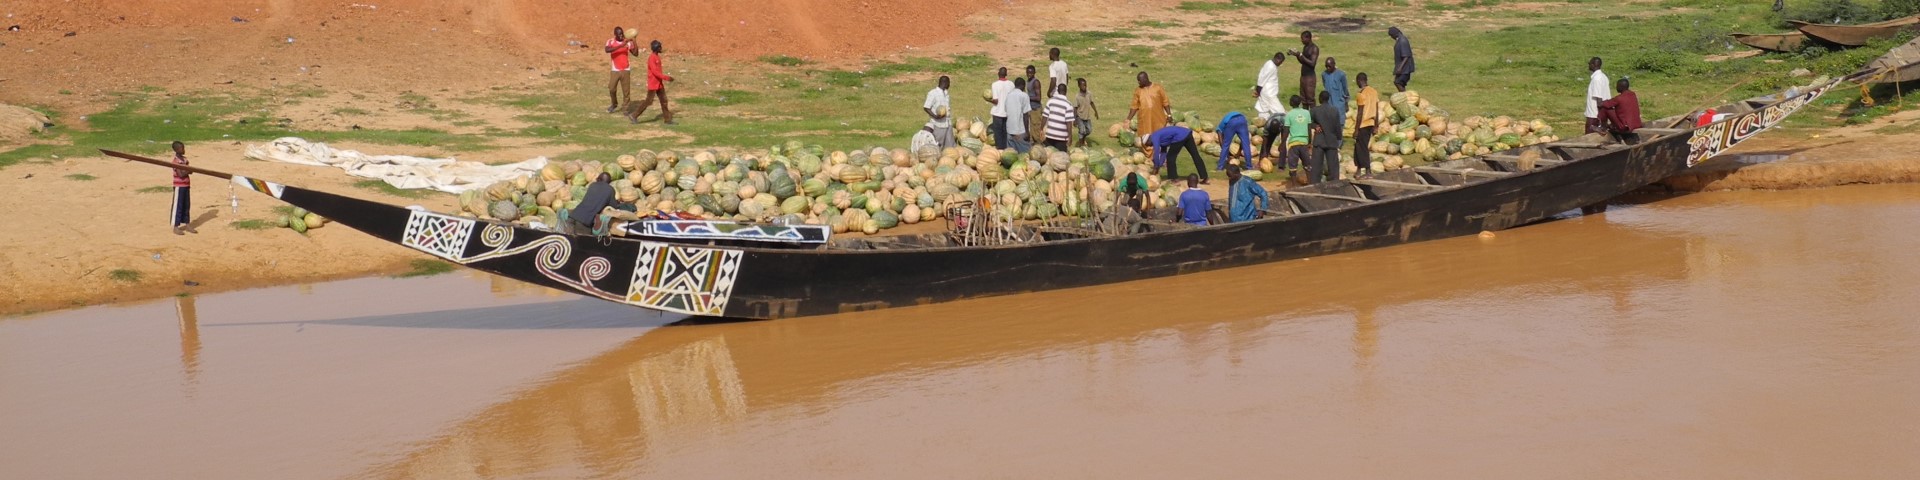 People unload a wooden ship with pumpkins in Niger.